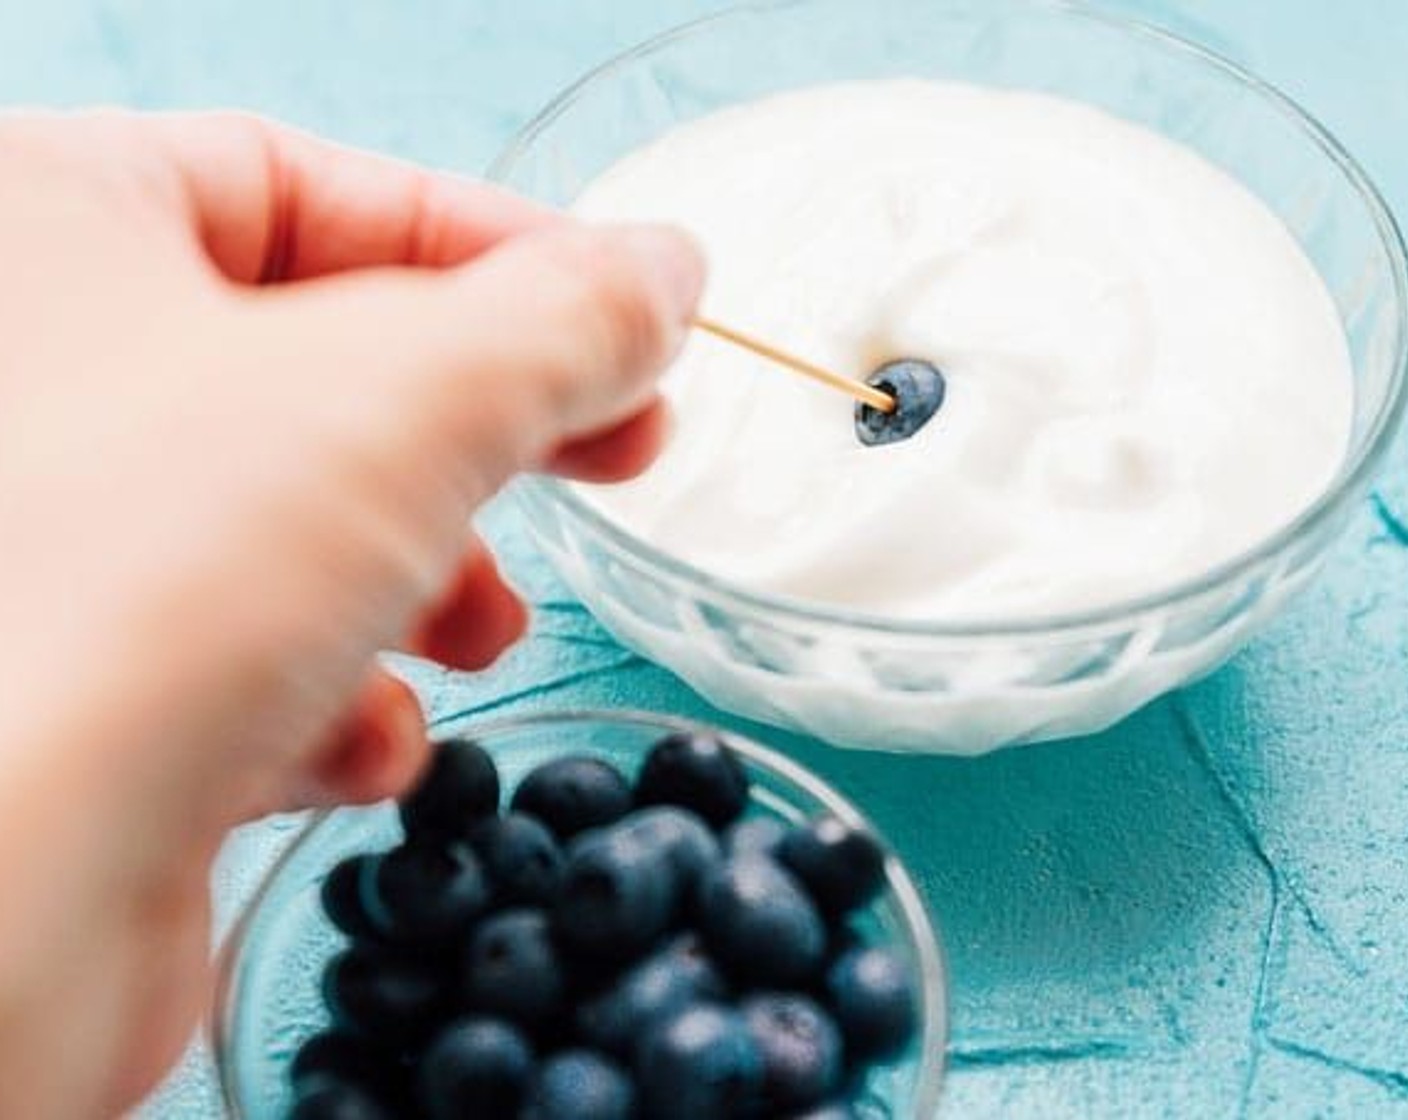 step 2 Place each of the Fresh Blueberry (1 cup) on a toothpick and dip in Yogurt (1/2 cup). Place single-layered on a parchment or wax paper-lined cookie sheet.